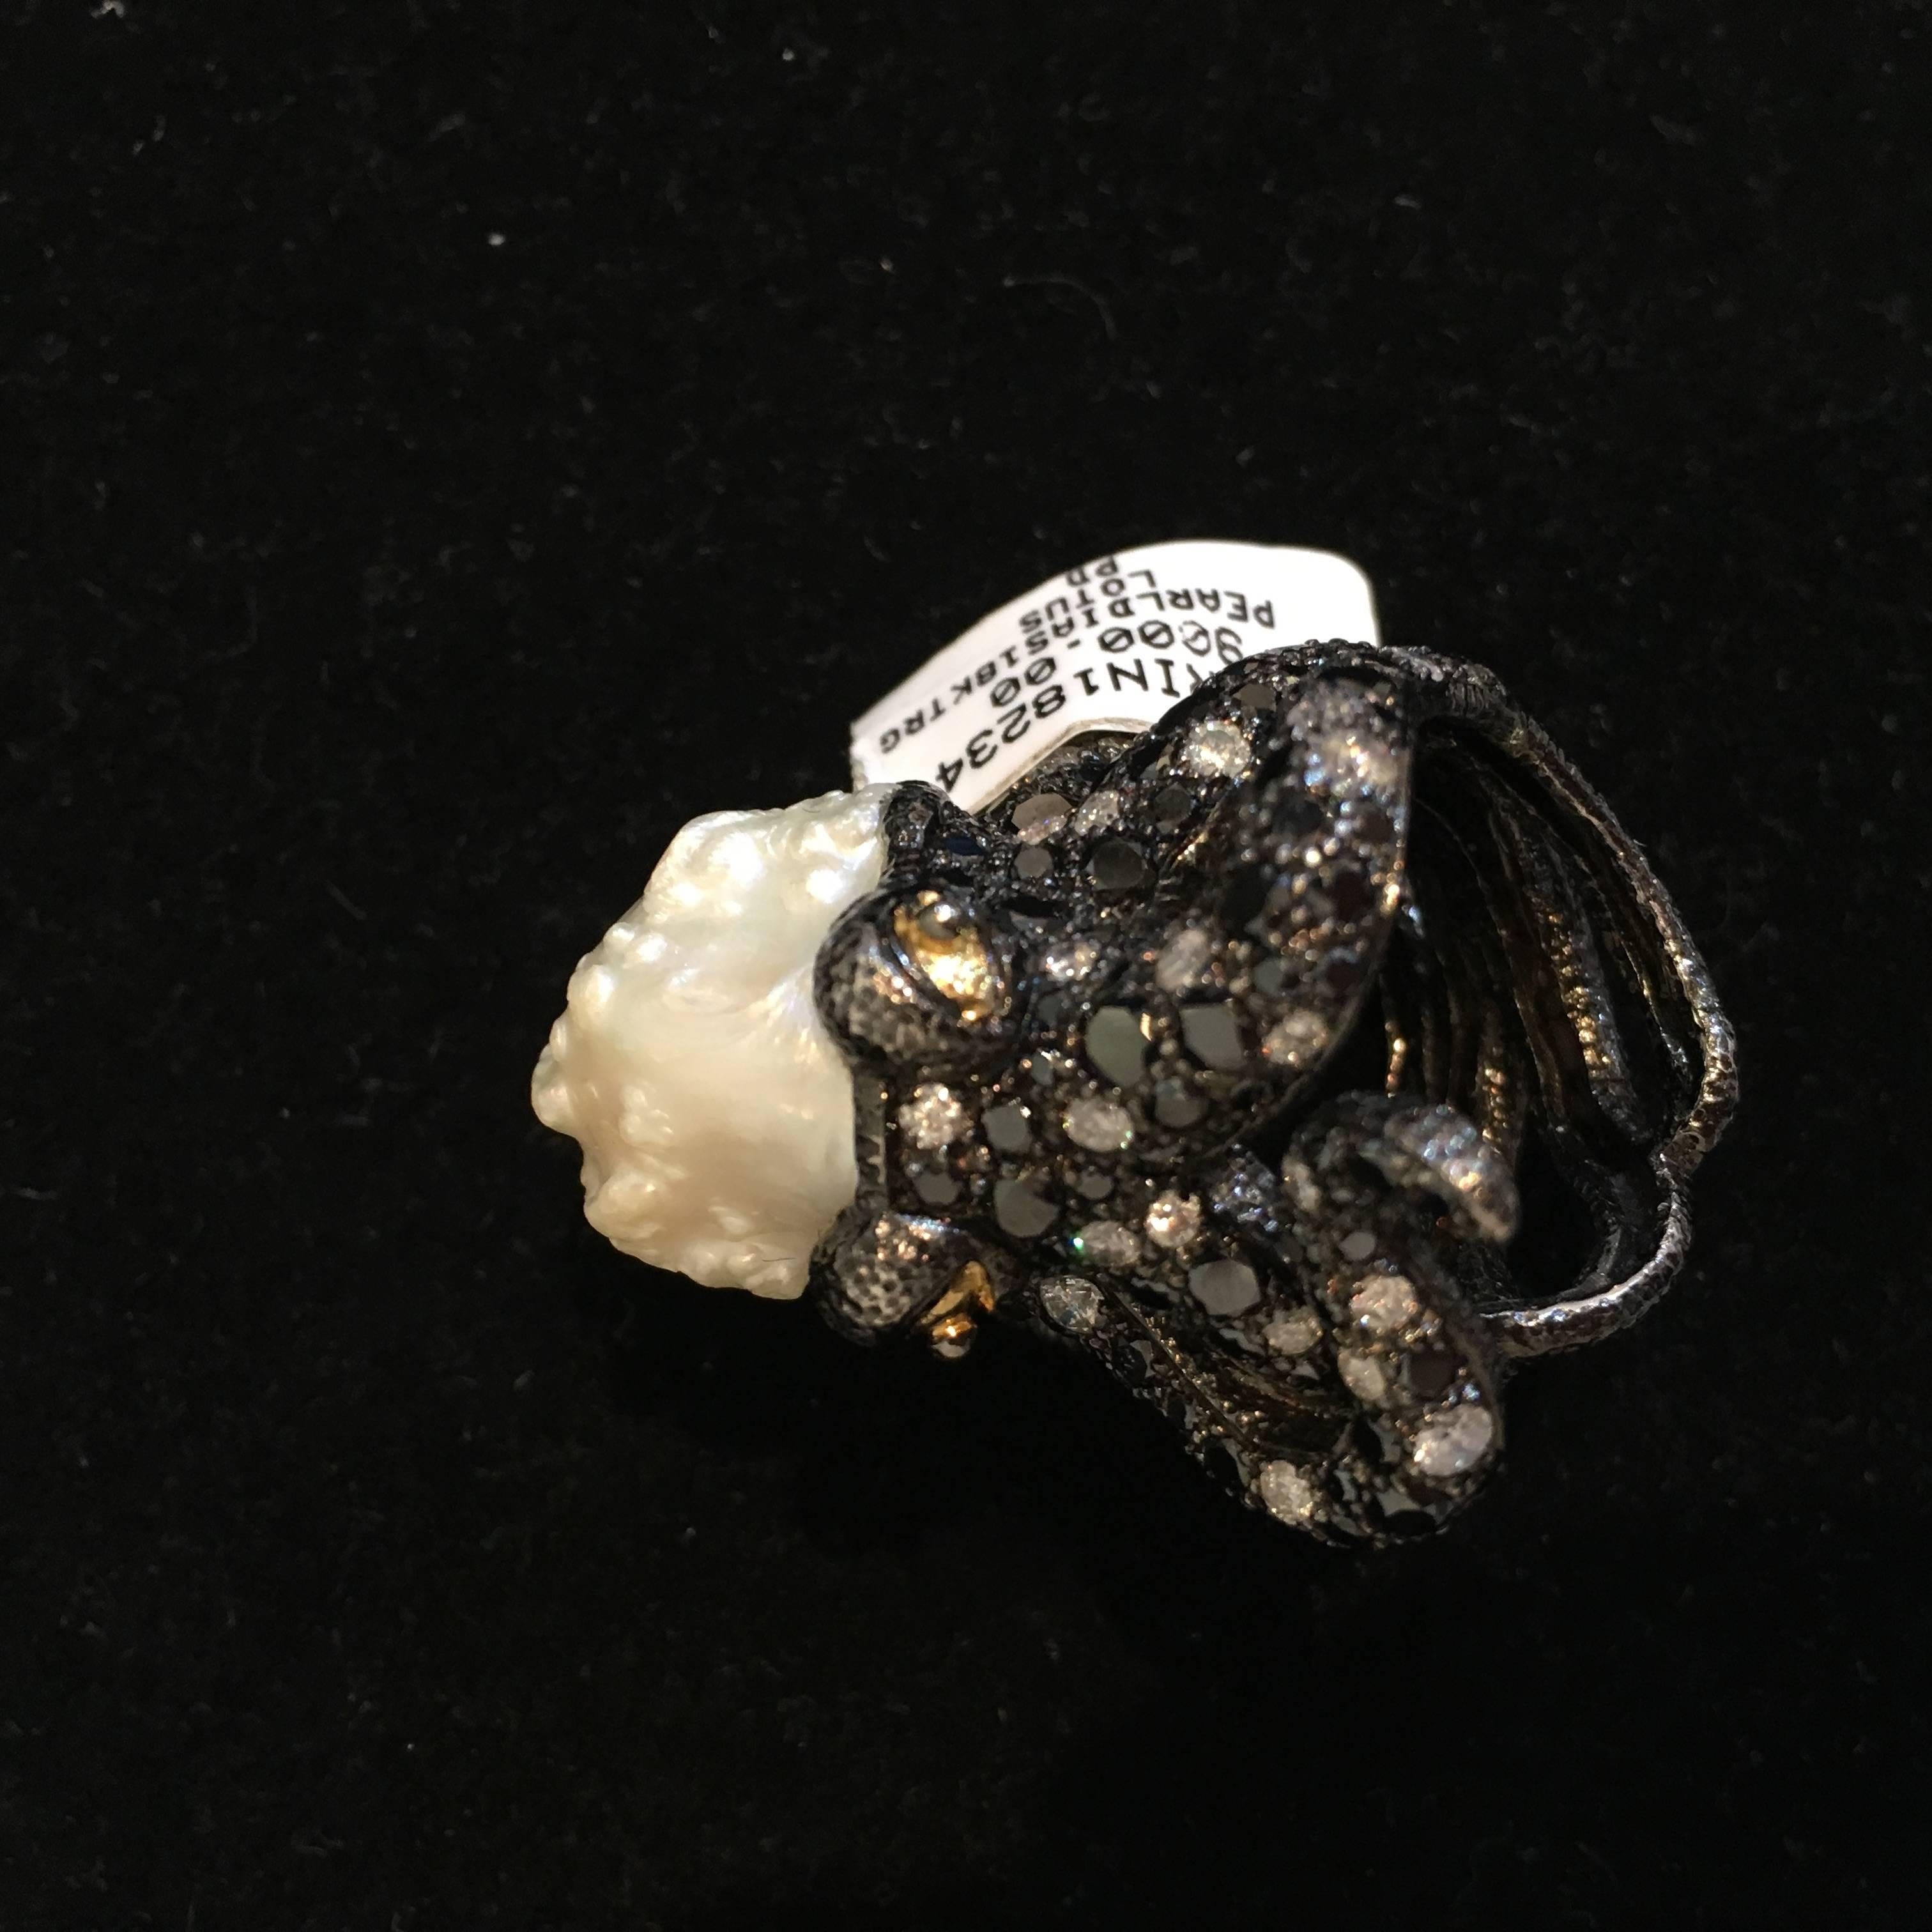 Lotus Arts de Vivre blackened sterling silver 'Octopus' ring set with a baroque pearl measuring approximately 18 x 16mm, and black and white diamonds. Size 7.